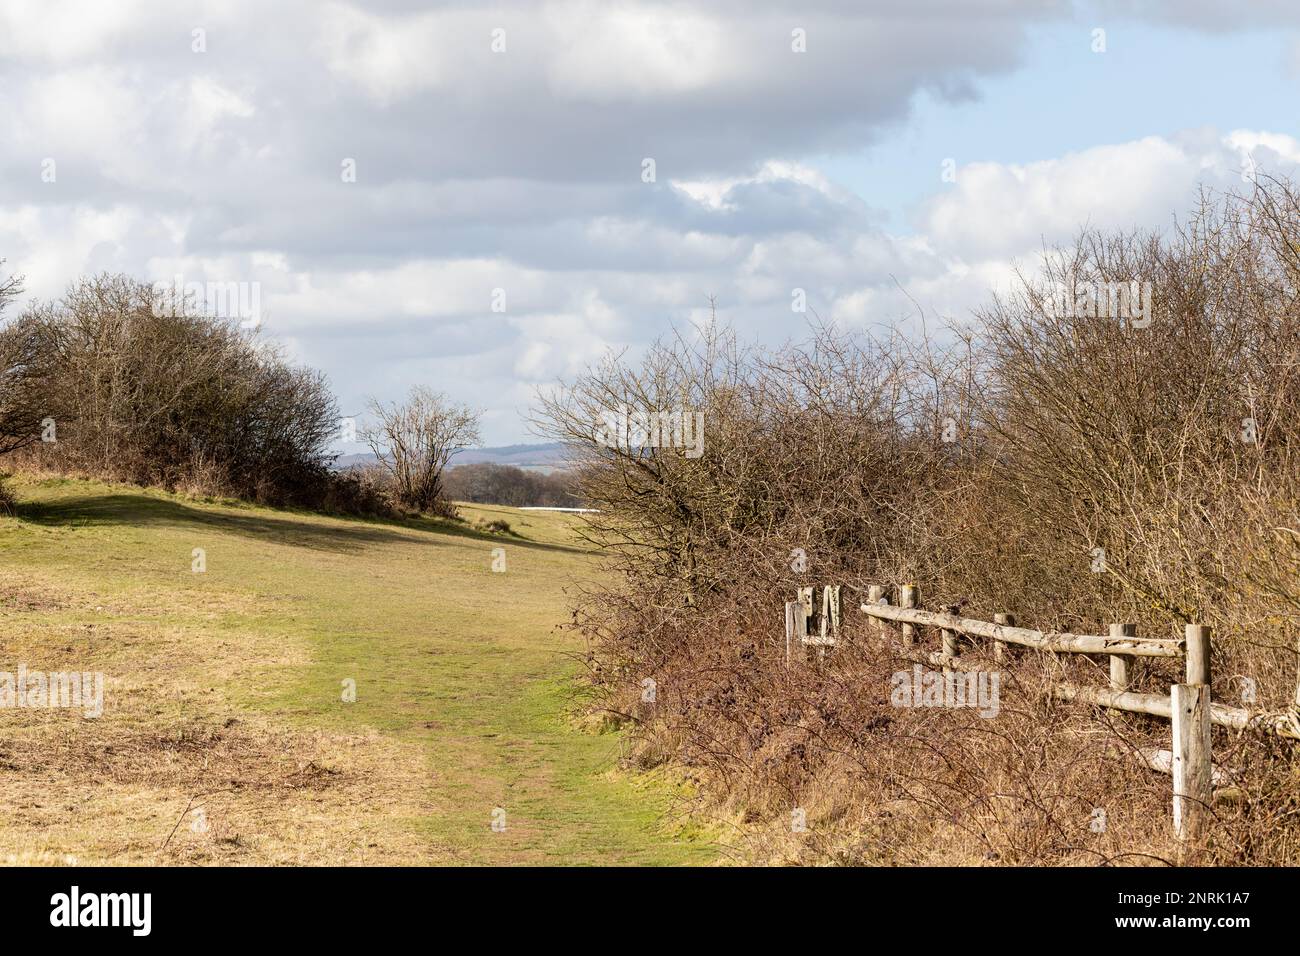 View of the countryside trees and grass in Dorset, England, UK on a sunny winter morning. Stock Photo